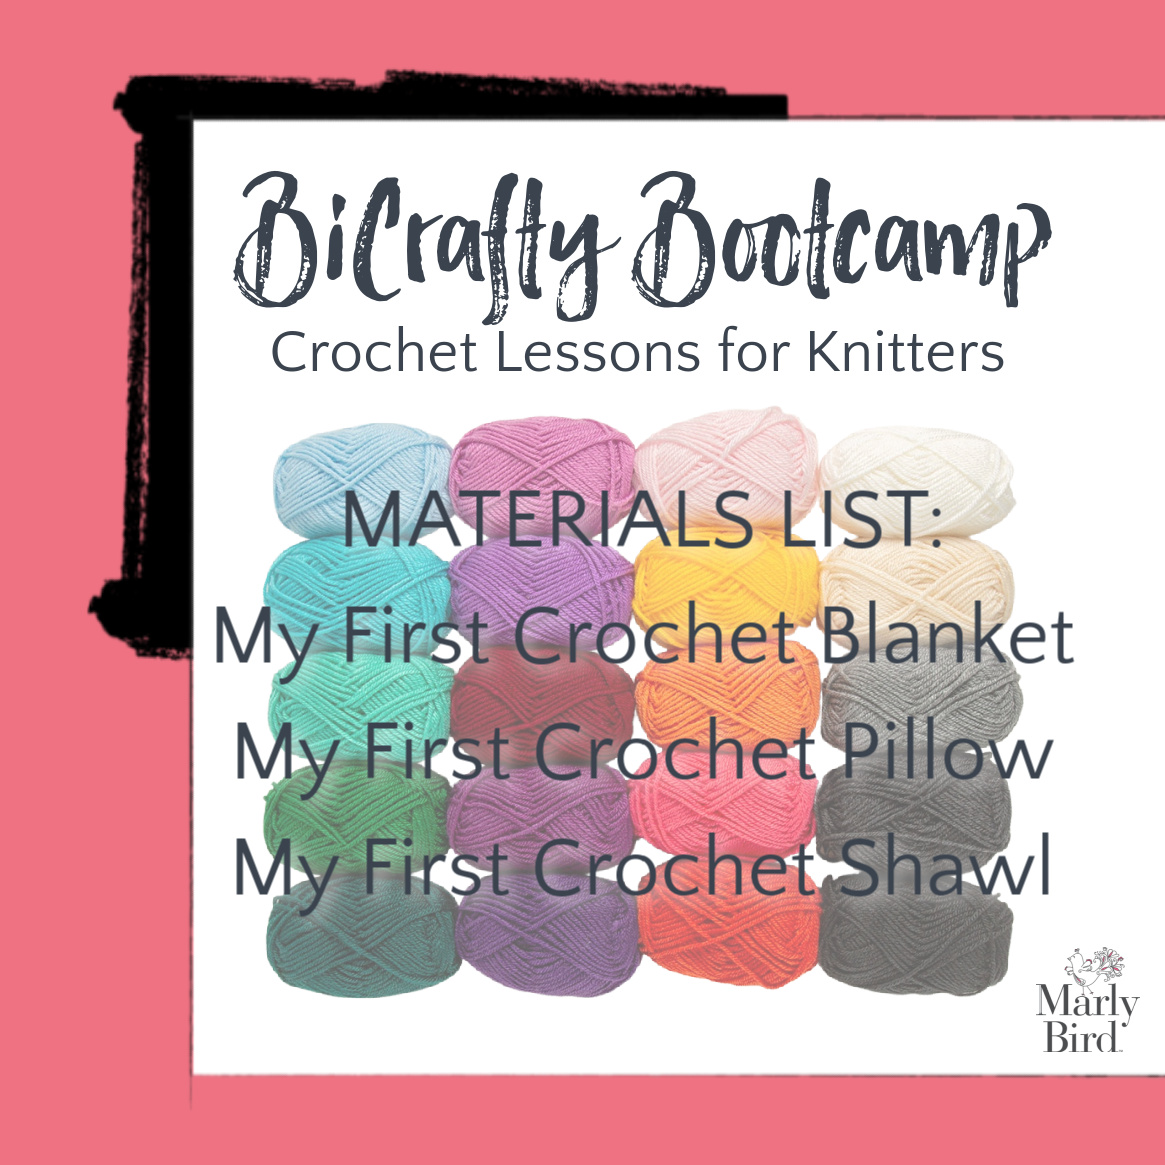 What Yarn Do I Need BiCrafty Bootcamp Crochet Lessons for Knitters Materials List for my first crochet blanket, my first crochet pillow, my first crochet shawl